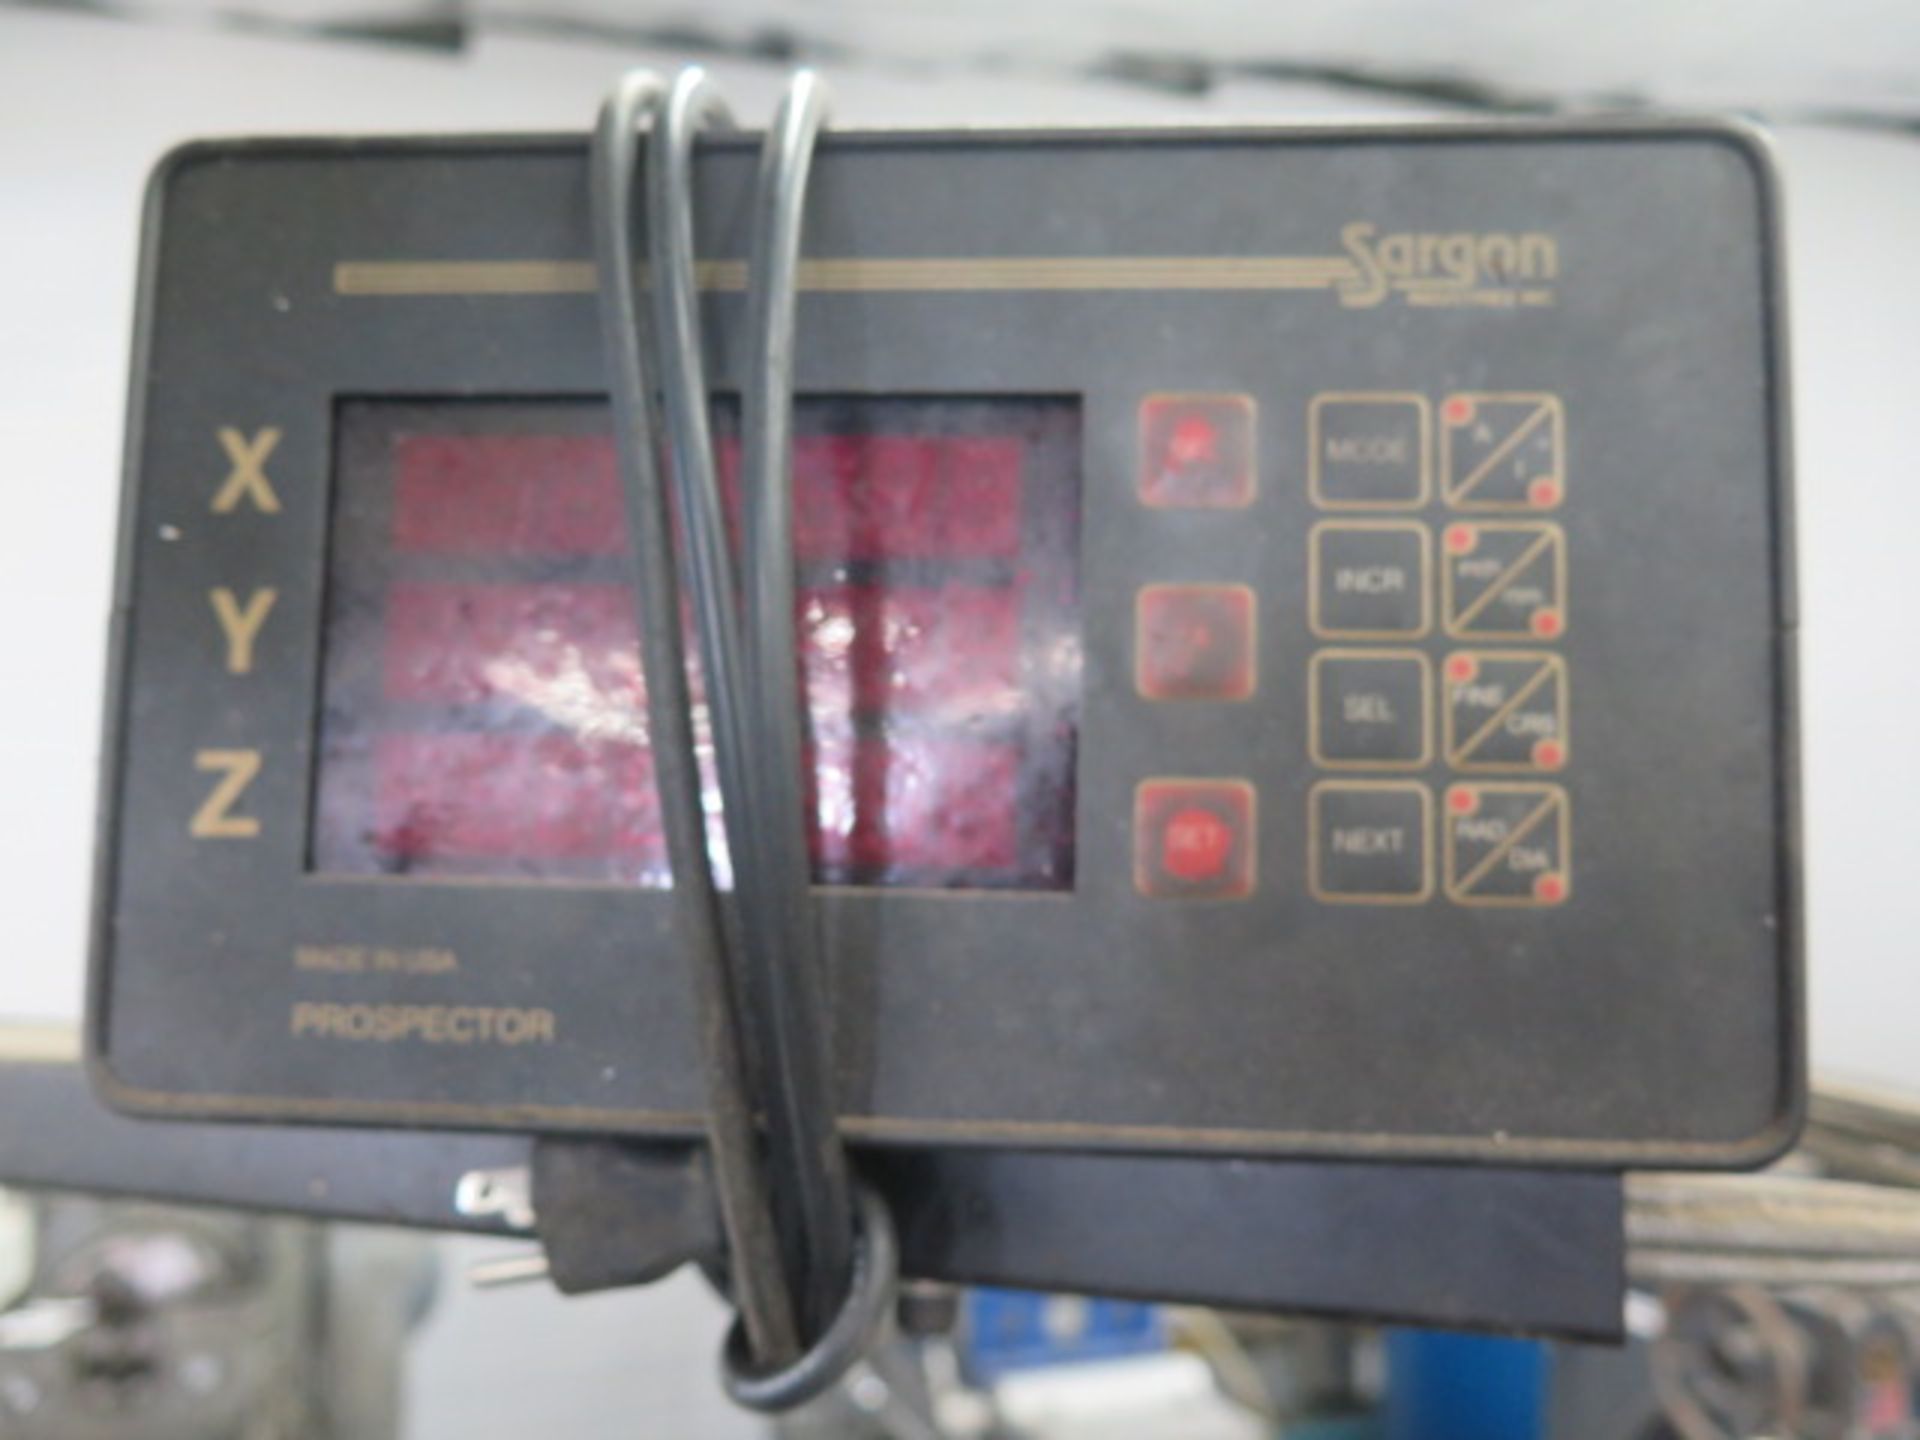 Acra AM-3 Vertical Mill s/n 961819 w/ Sargon 3-Axis DRO, 3Hp Motor, 60-4200 Dial RPM, Sold AS IS - Image 7 of 13